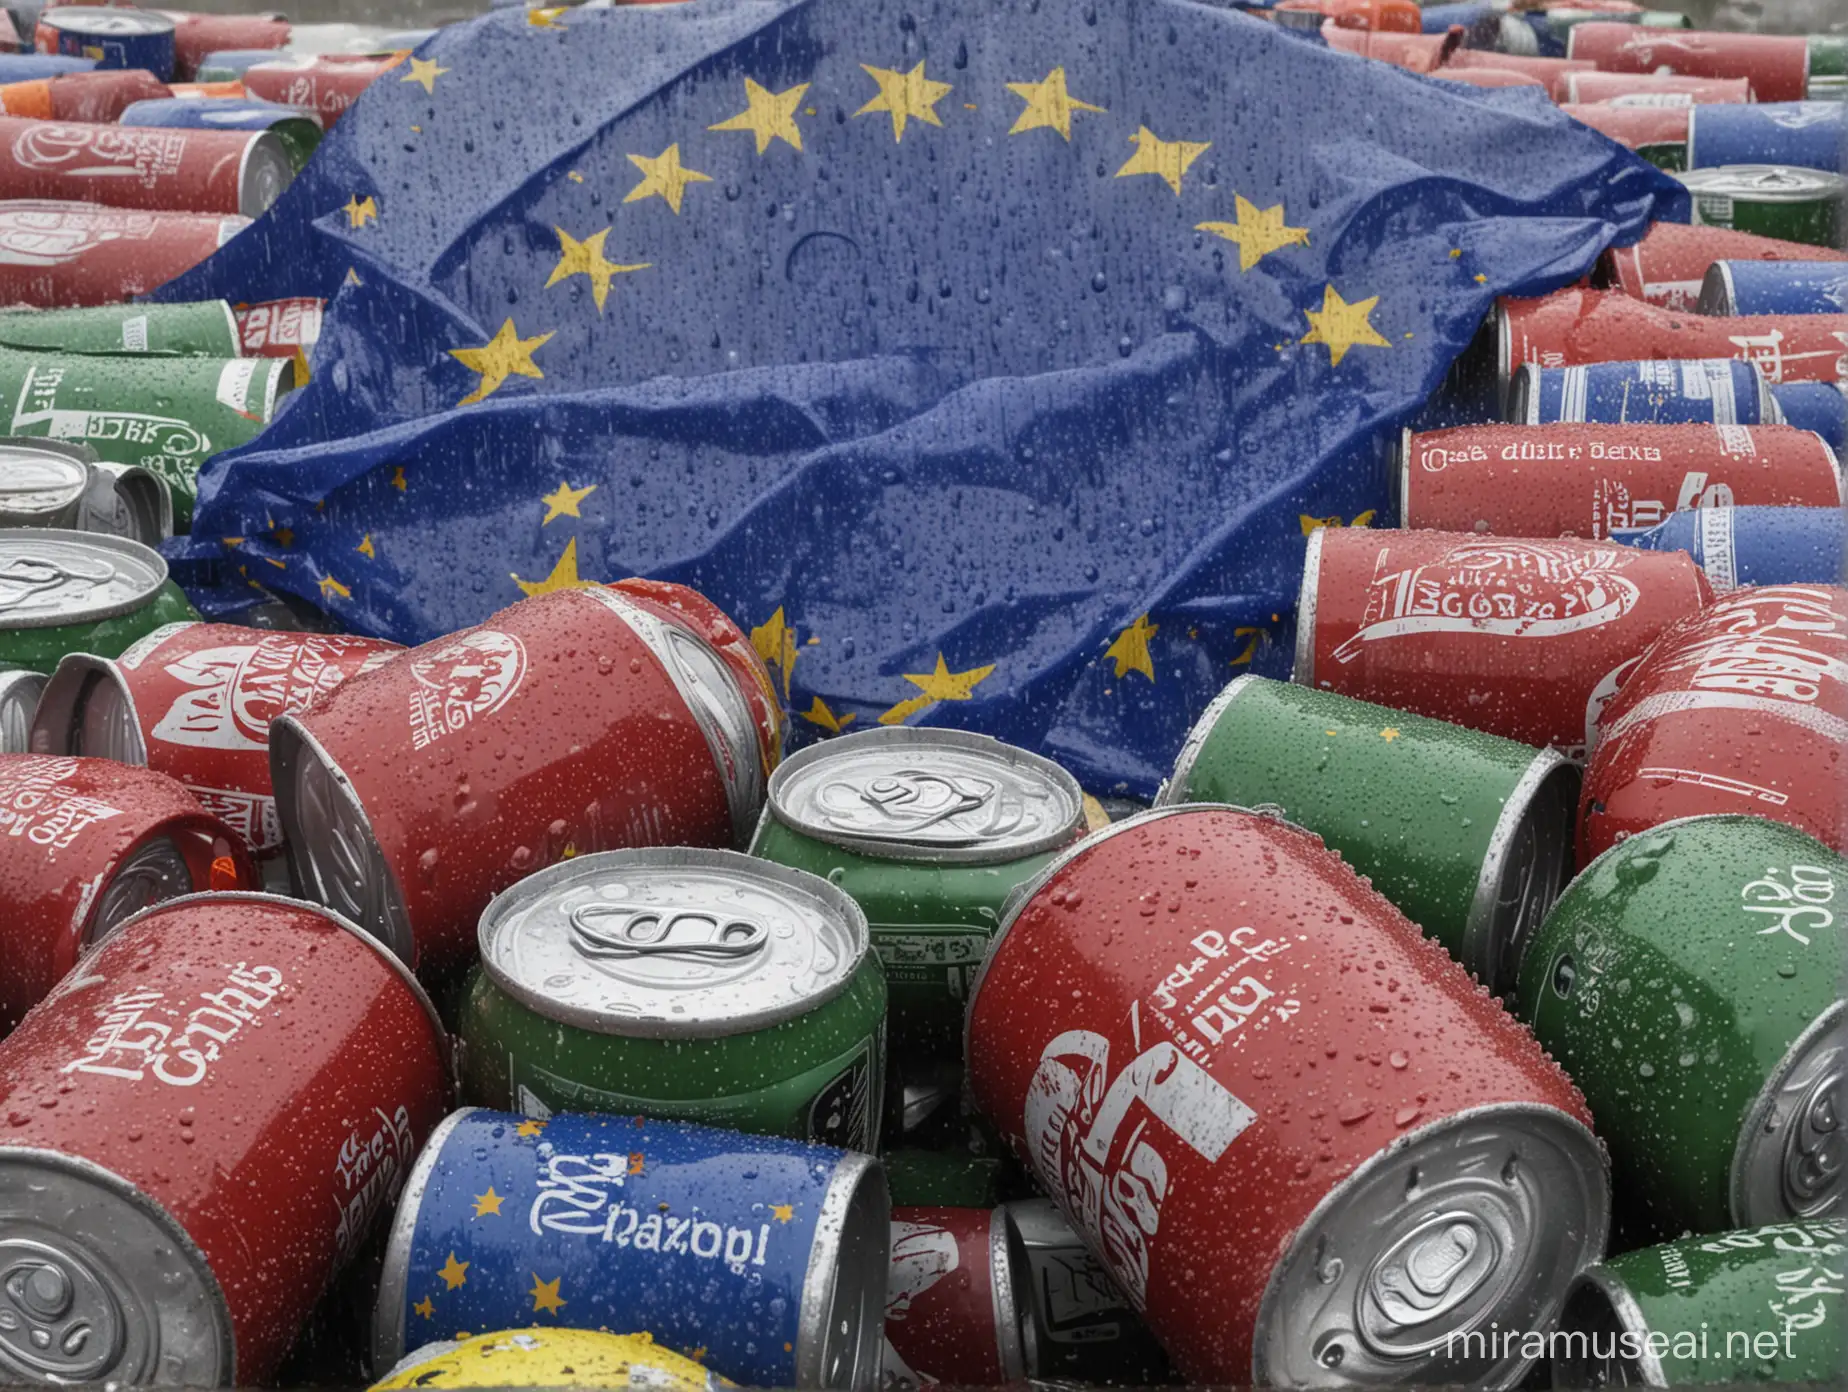 Rain purs down over the eu flag, waving behind a pile of used soda cans, no logos visible.